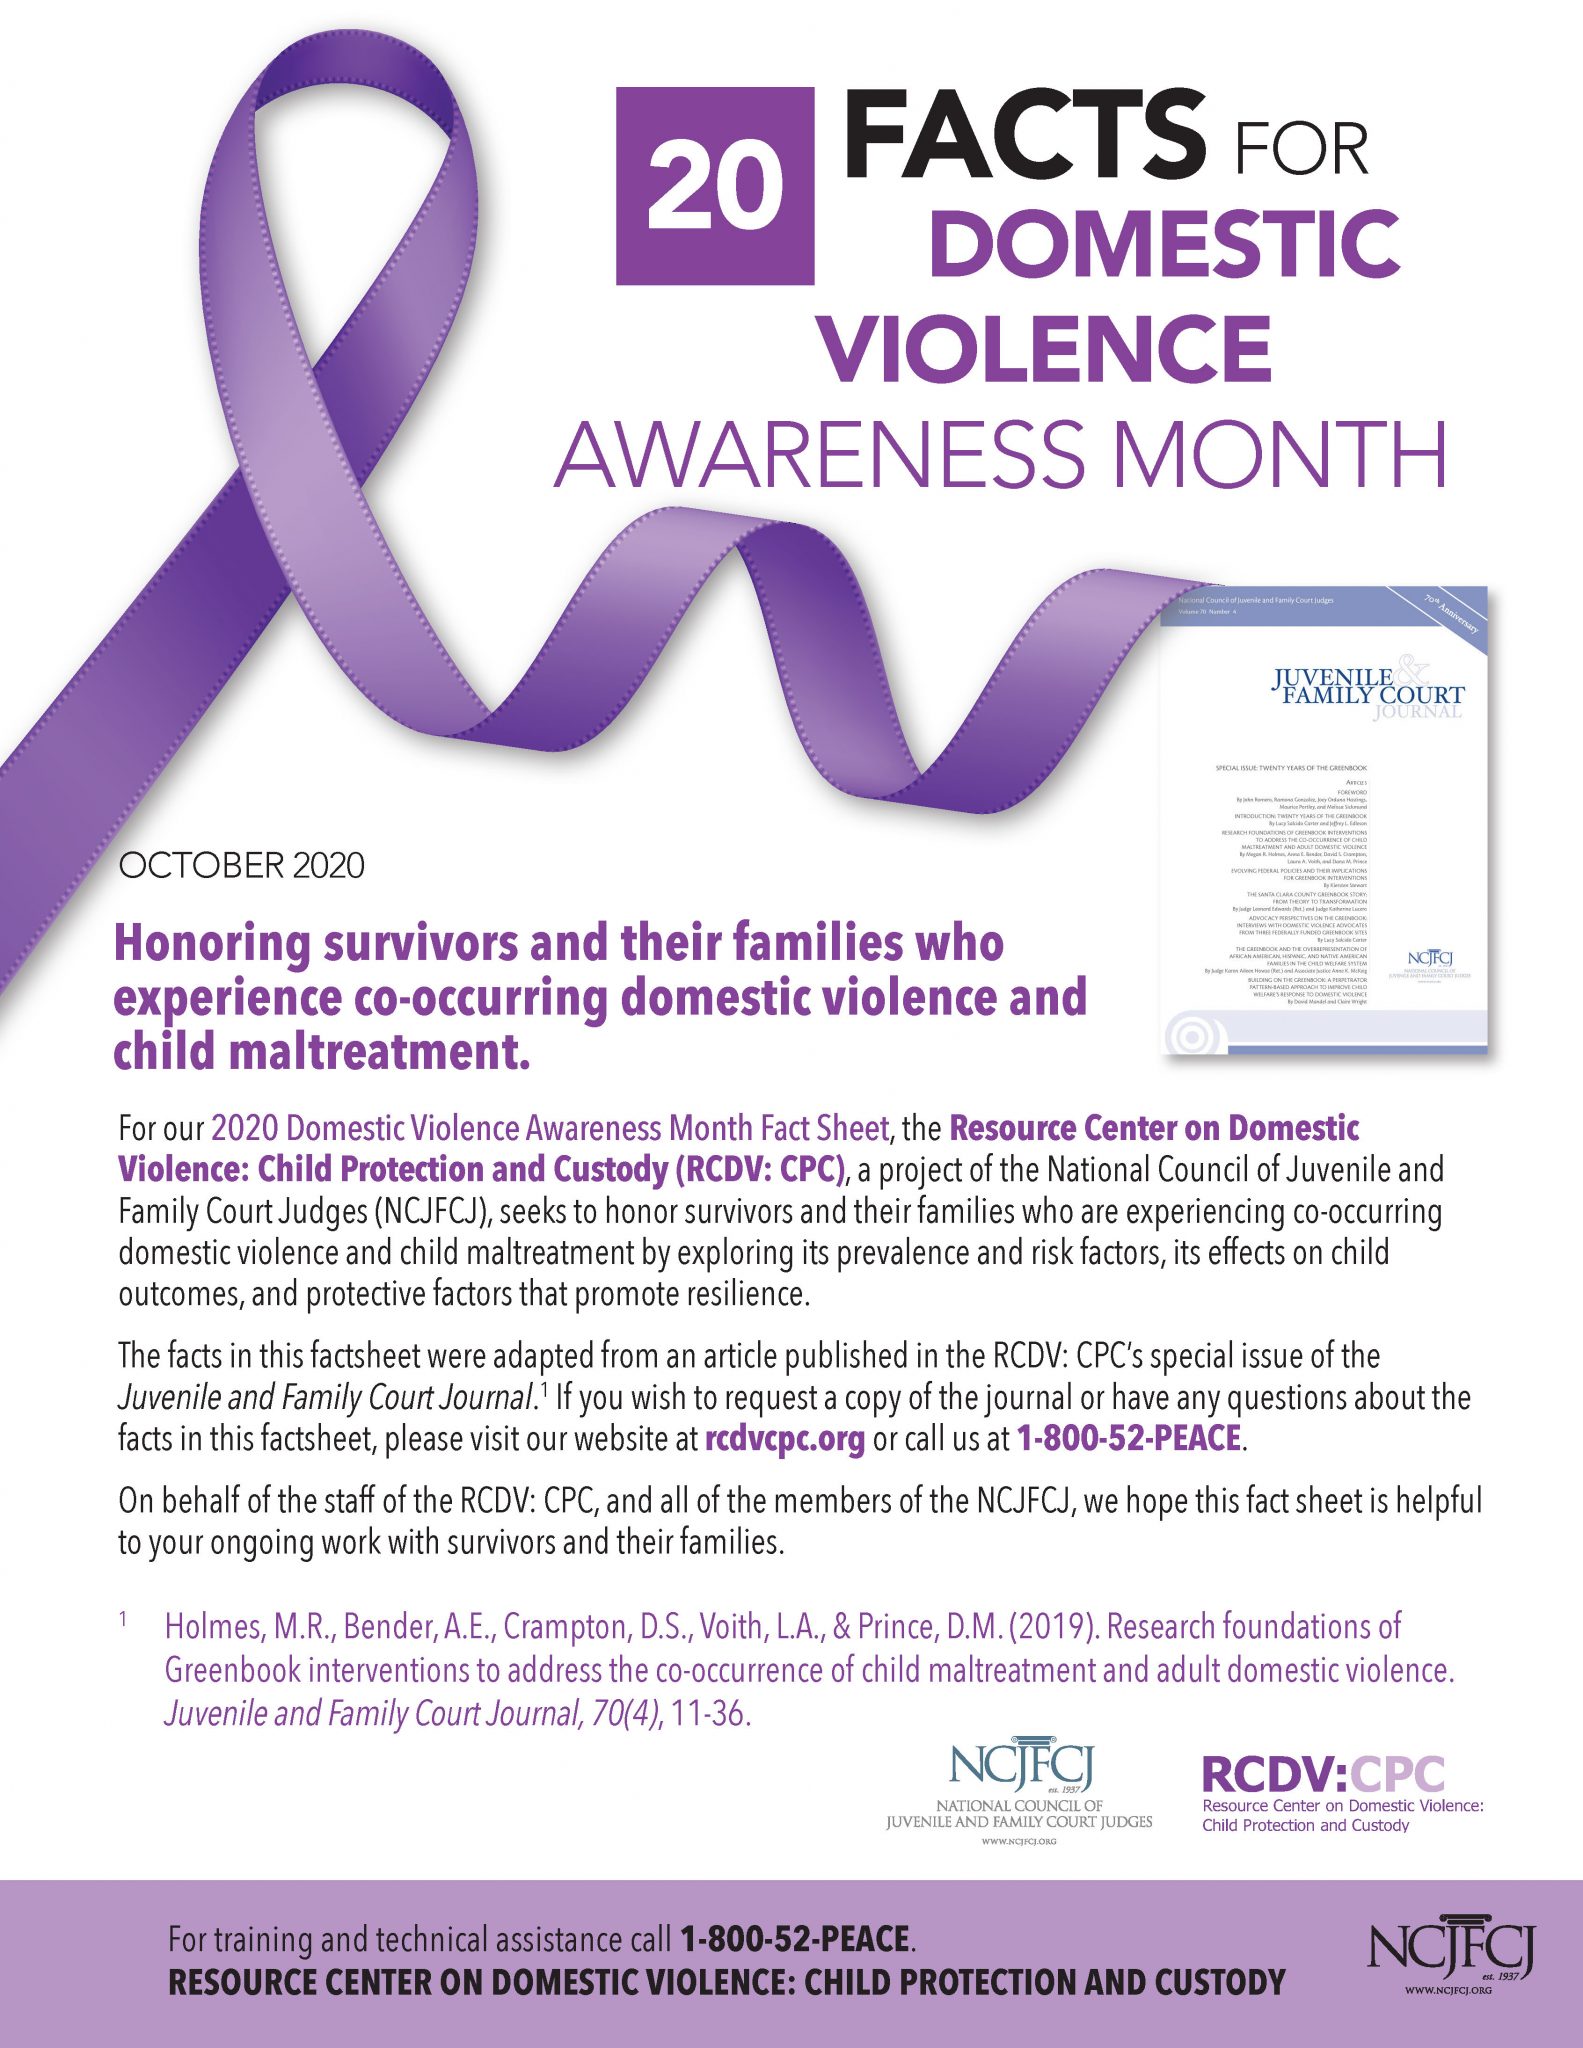 NCJFCJ Observes October as Domestic Violence Awareness Month with New